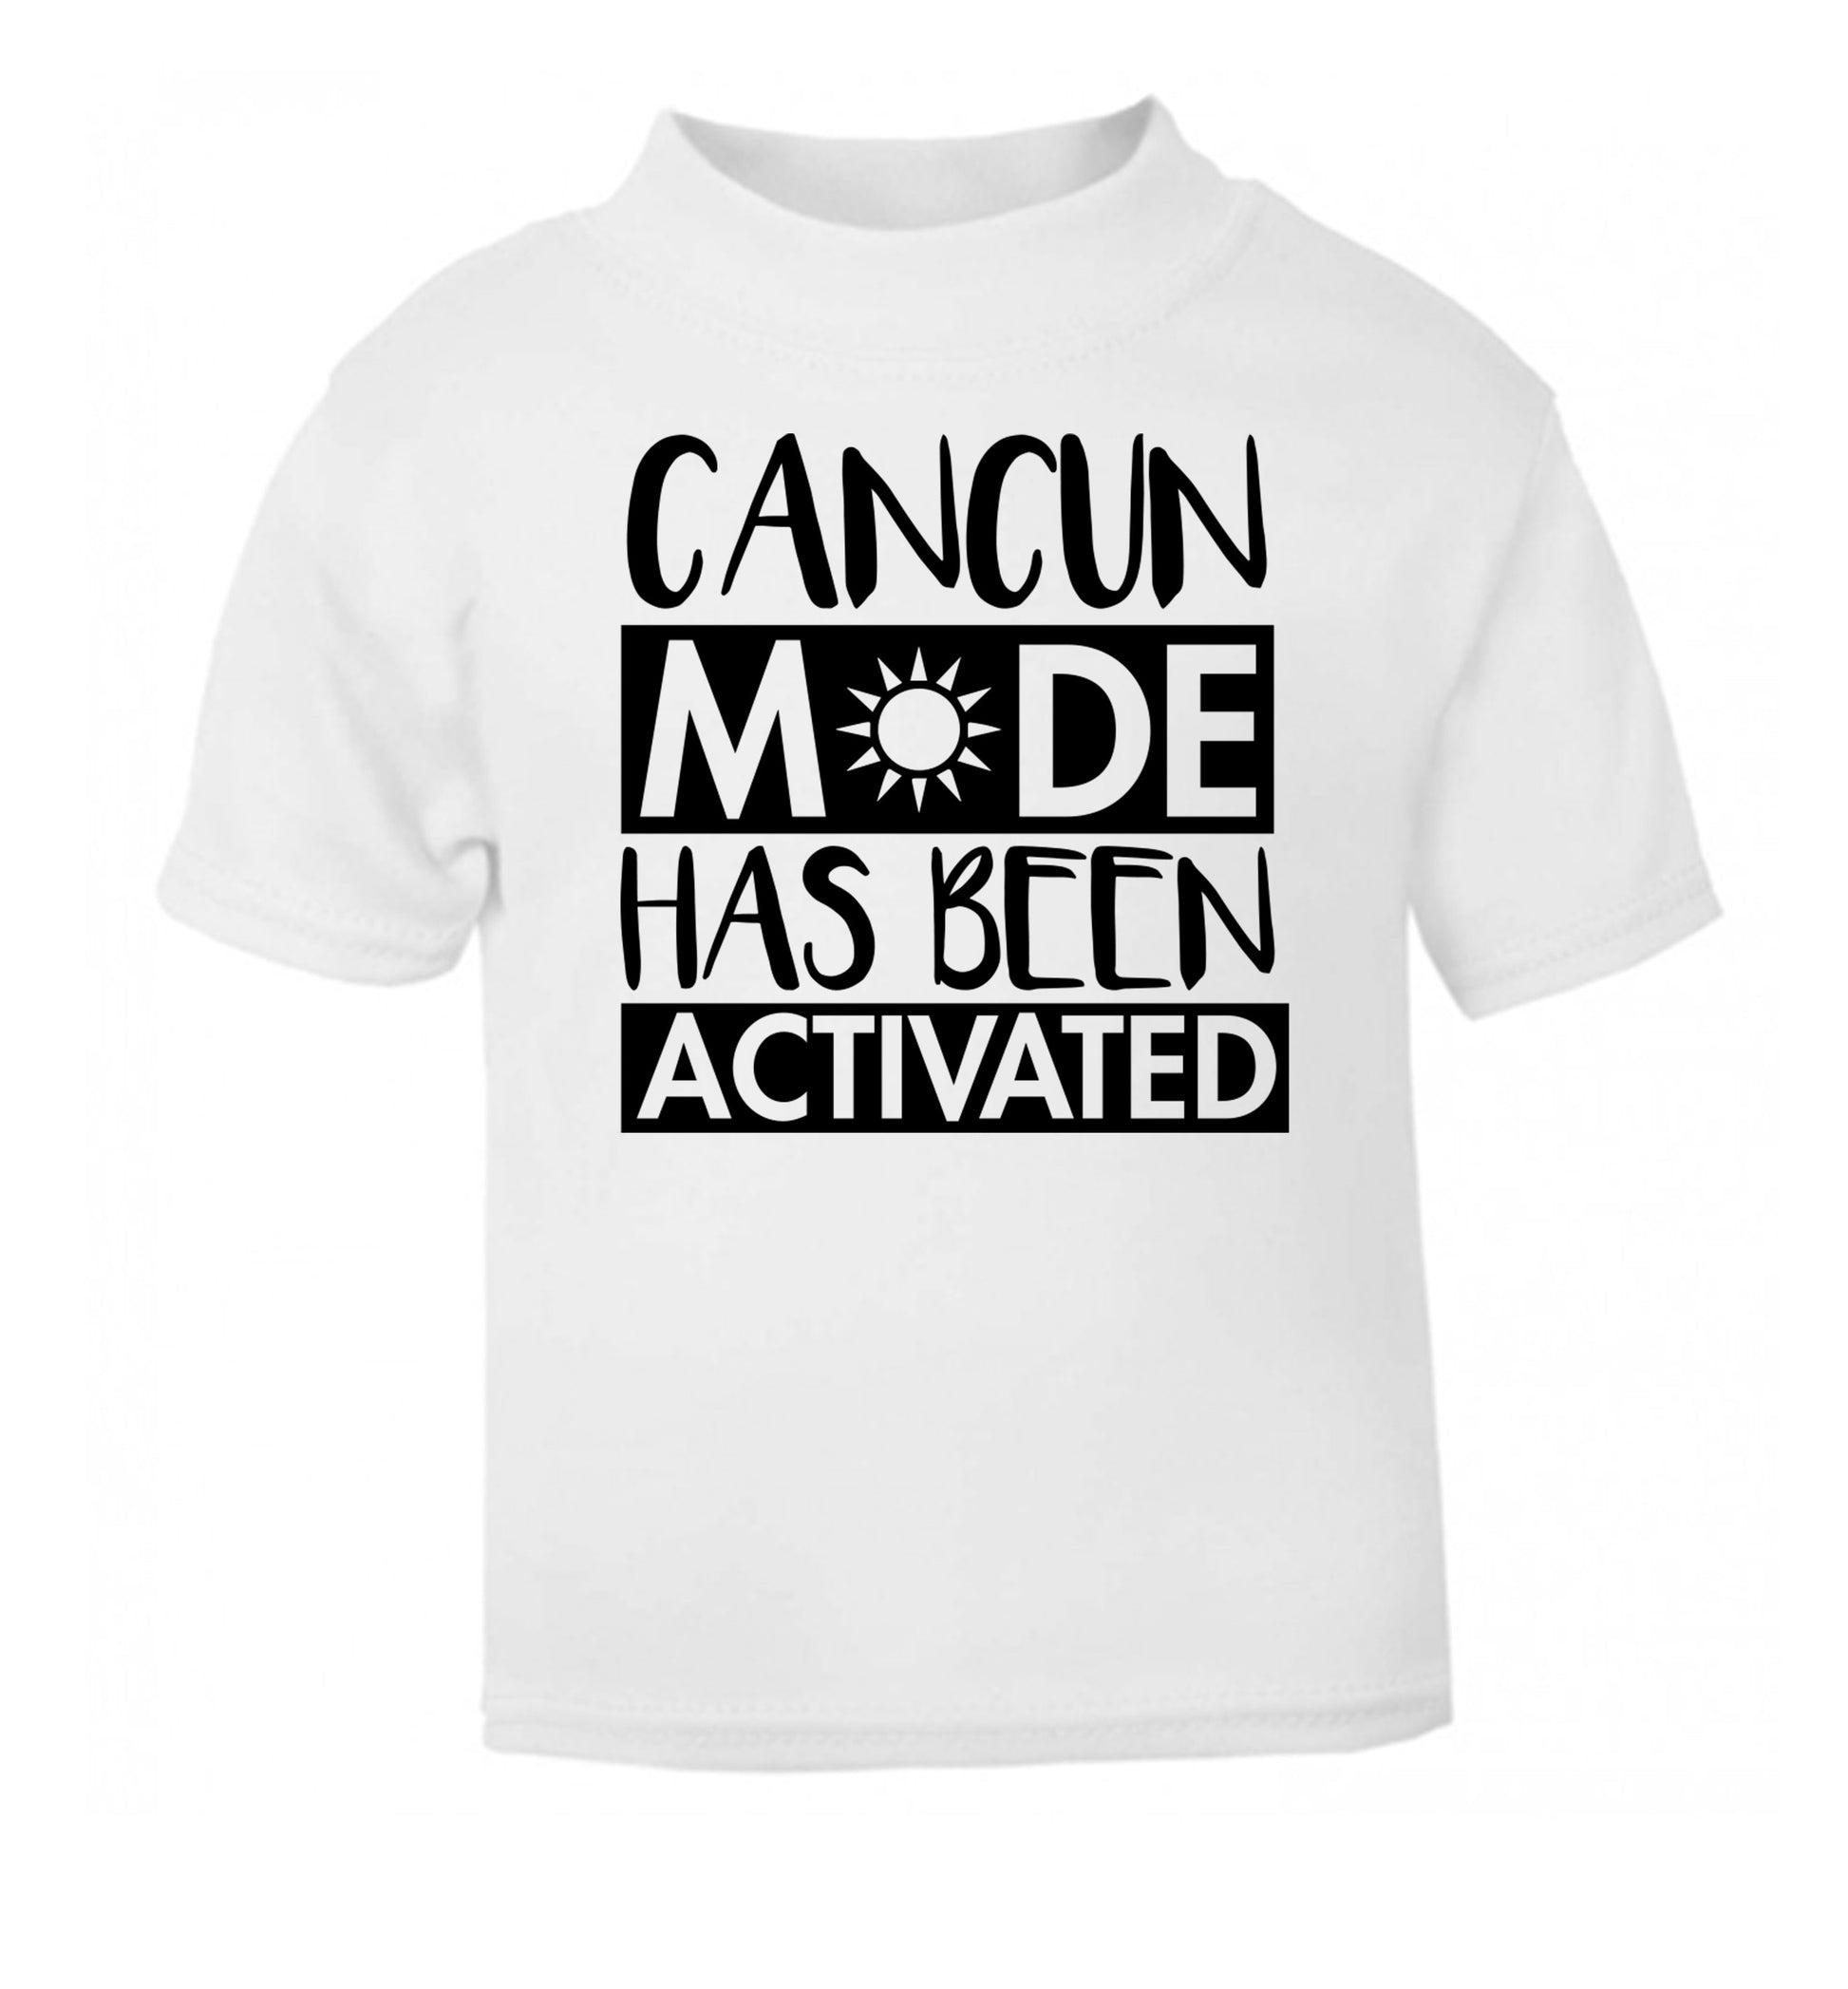 Cancun mode has been activated white Baby Toddler Tshirt 2 Years